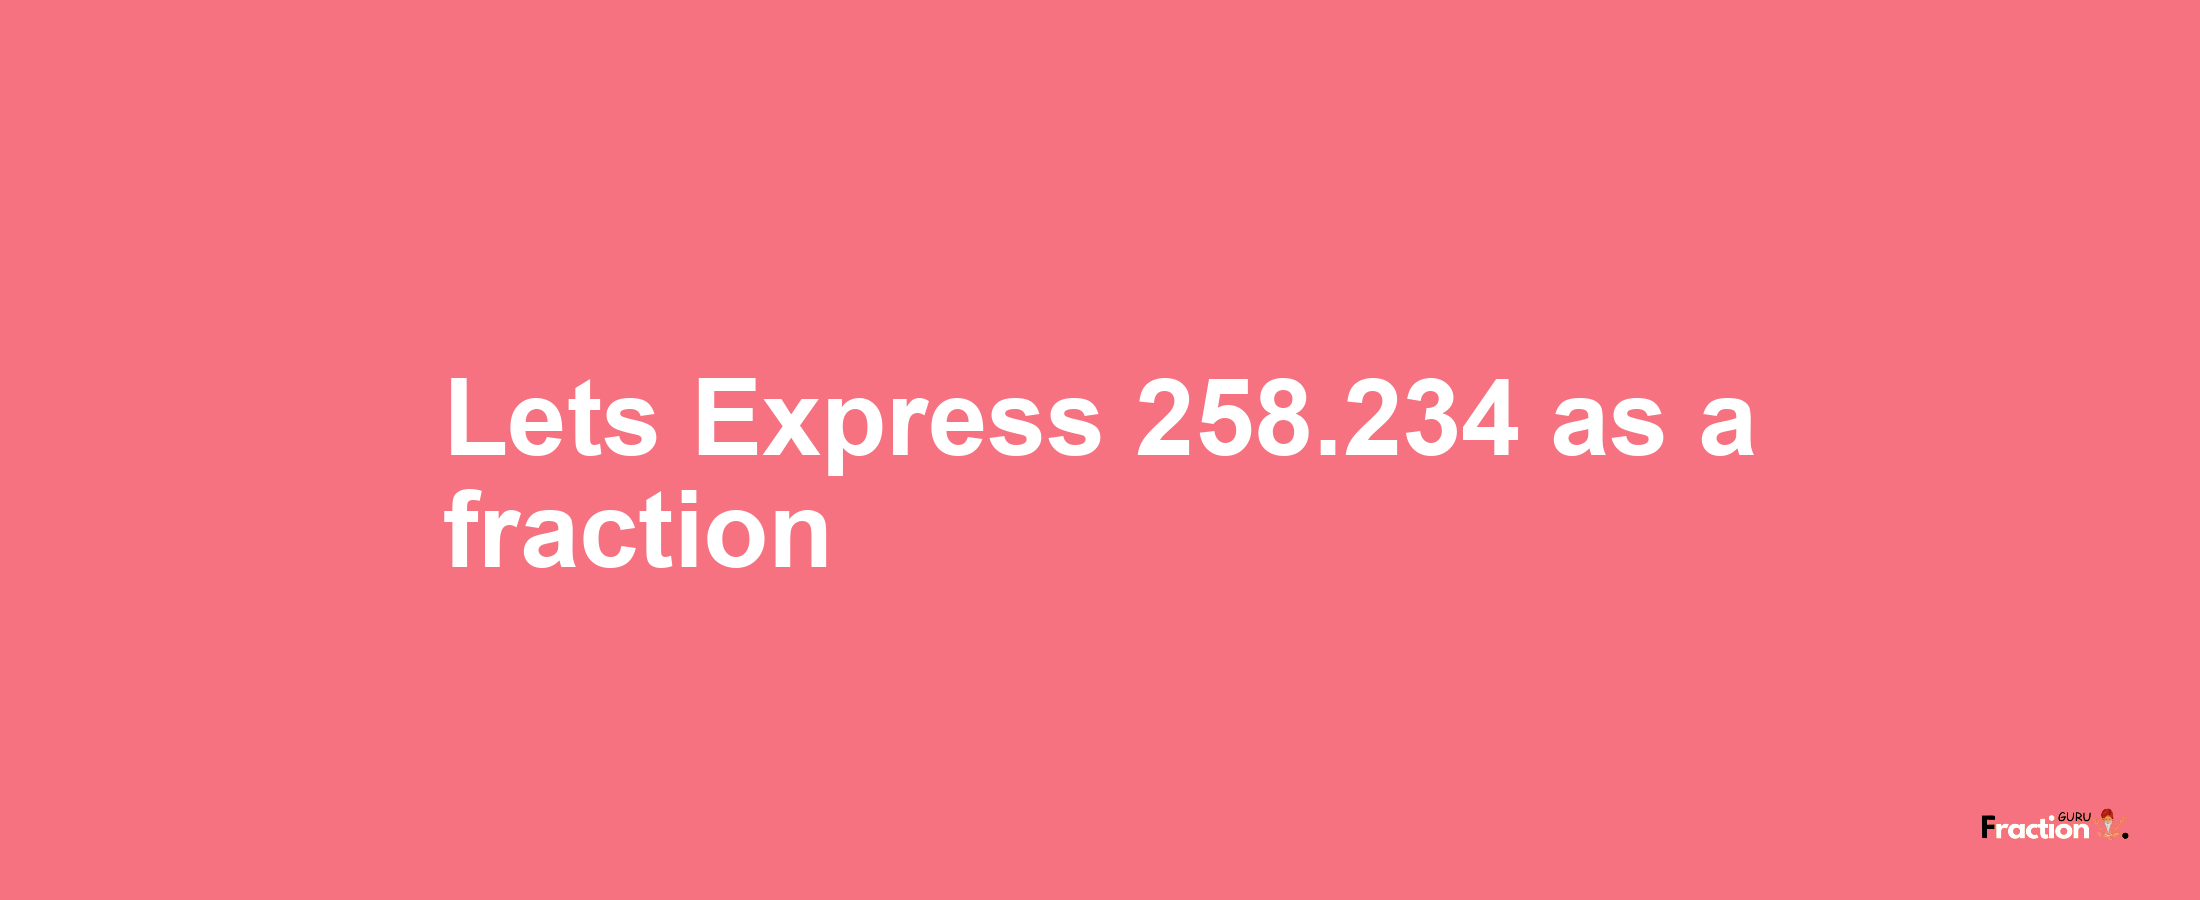 Lets Express 258.234 as afraction